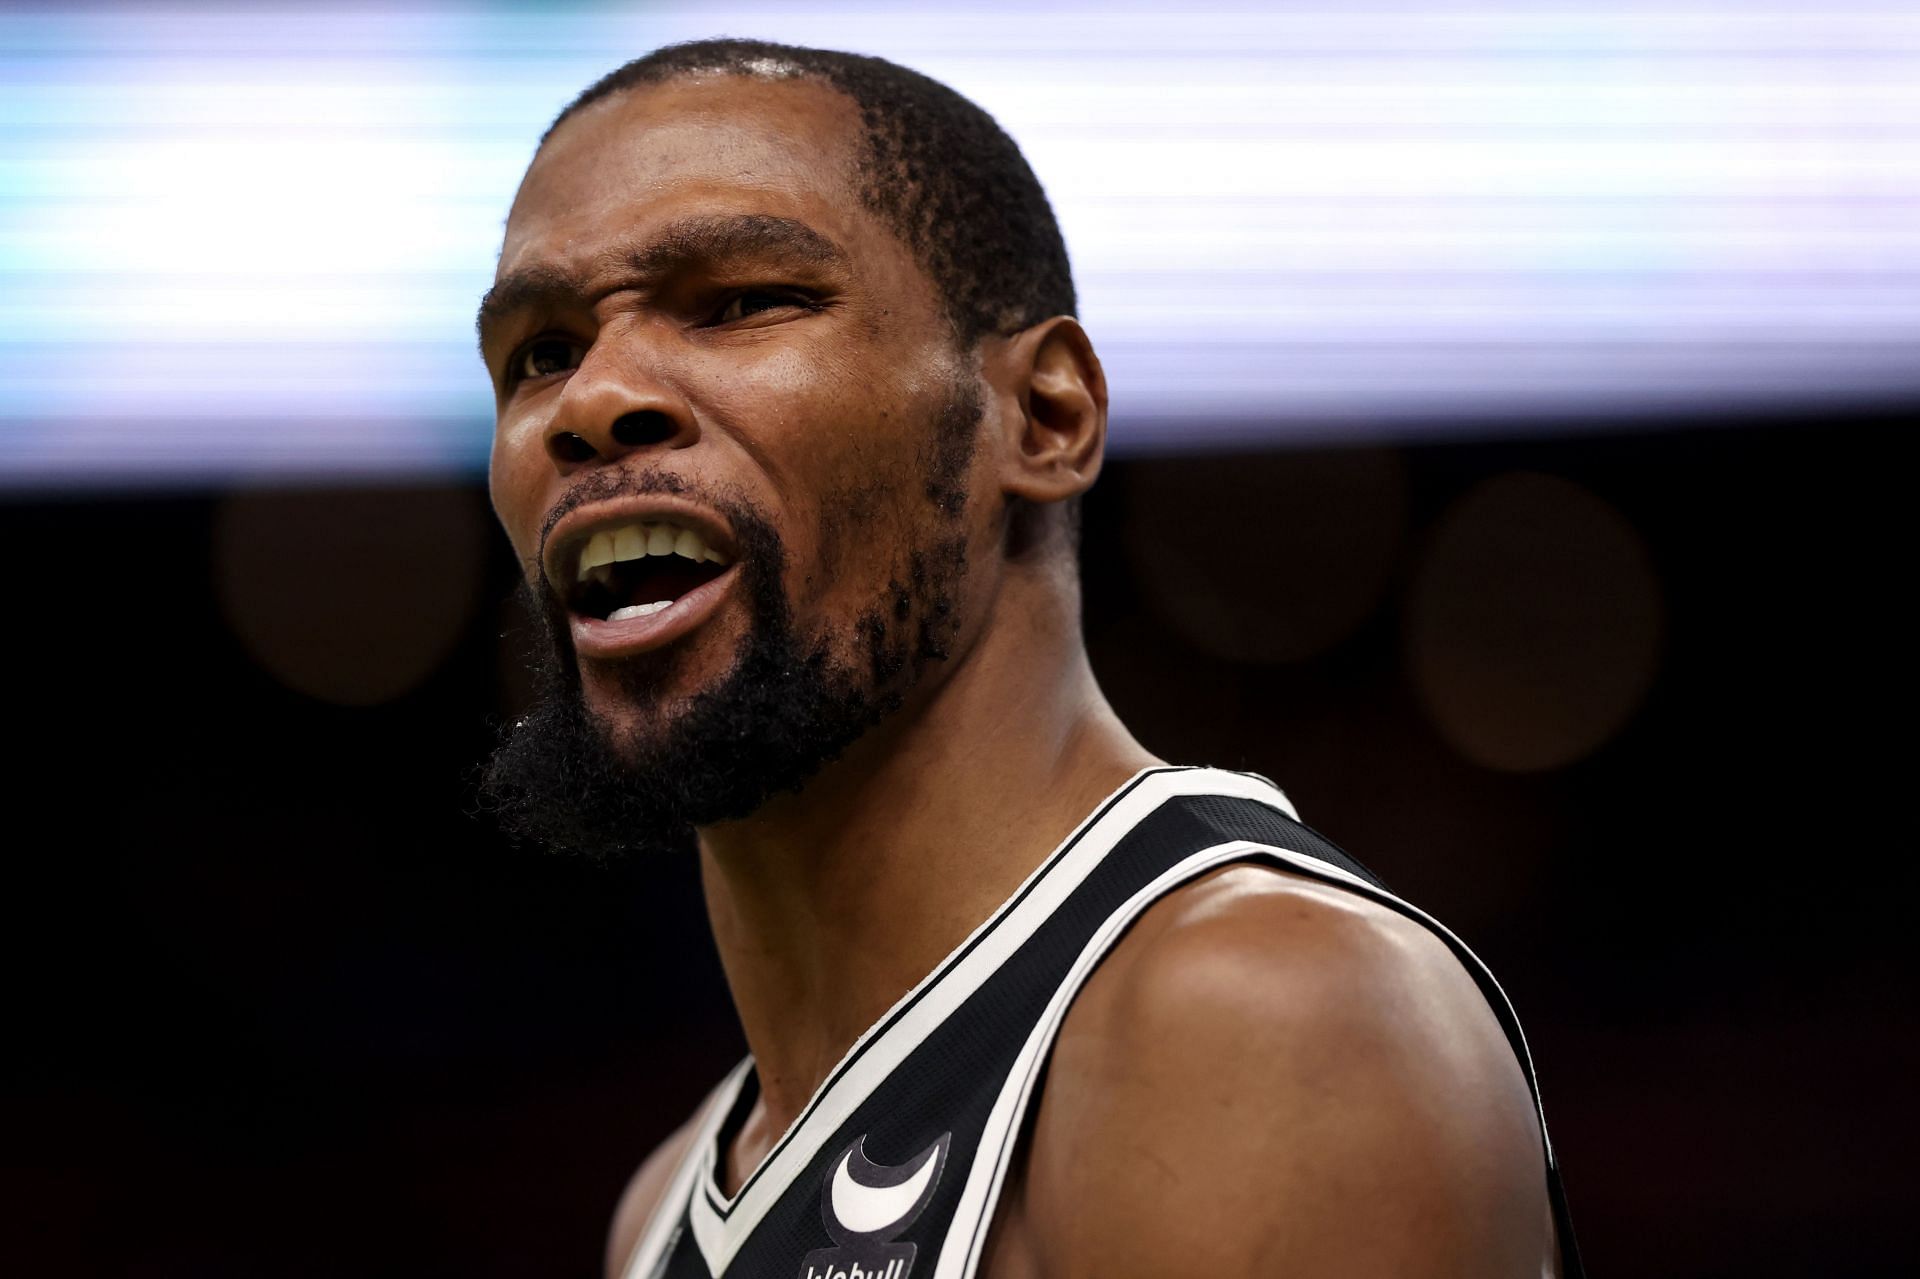 Kevin Durant of the Brooklyn Nets disputes a call during Game 2 of the Eastern Conference first round playoffs against the Boston Celtics on April 20 in Boston, Massachusetts